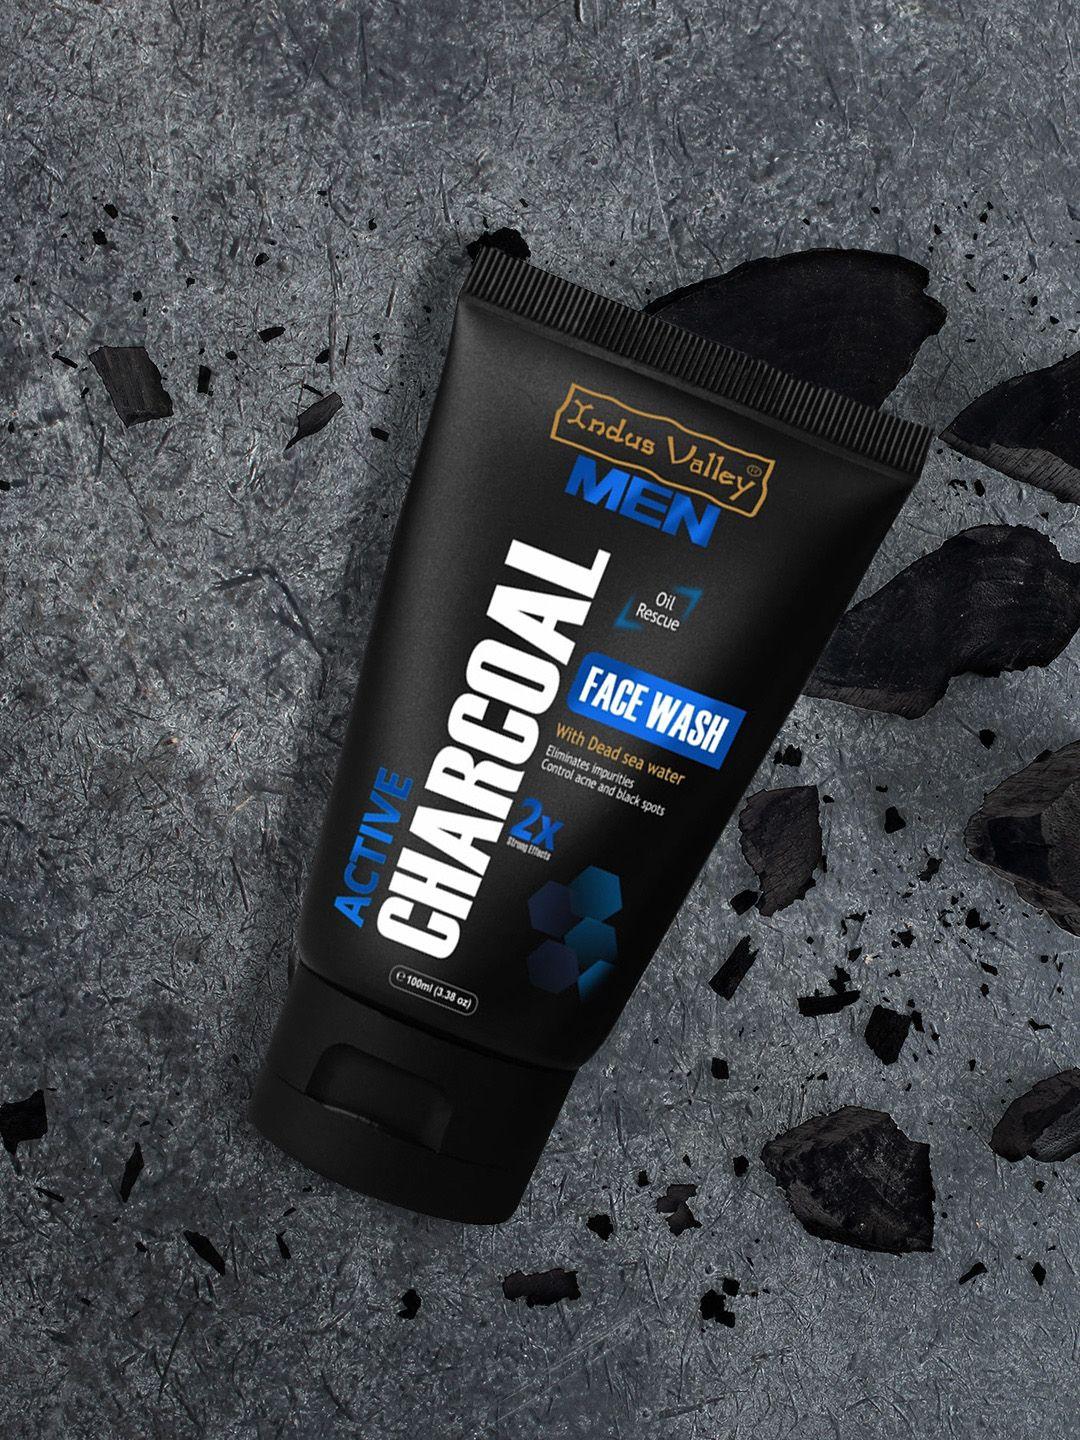 indus valley activated charcoal facewash